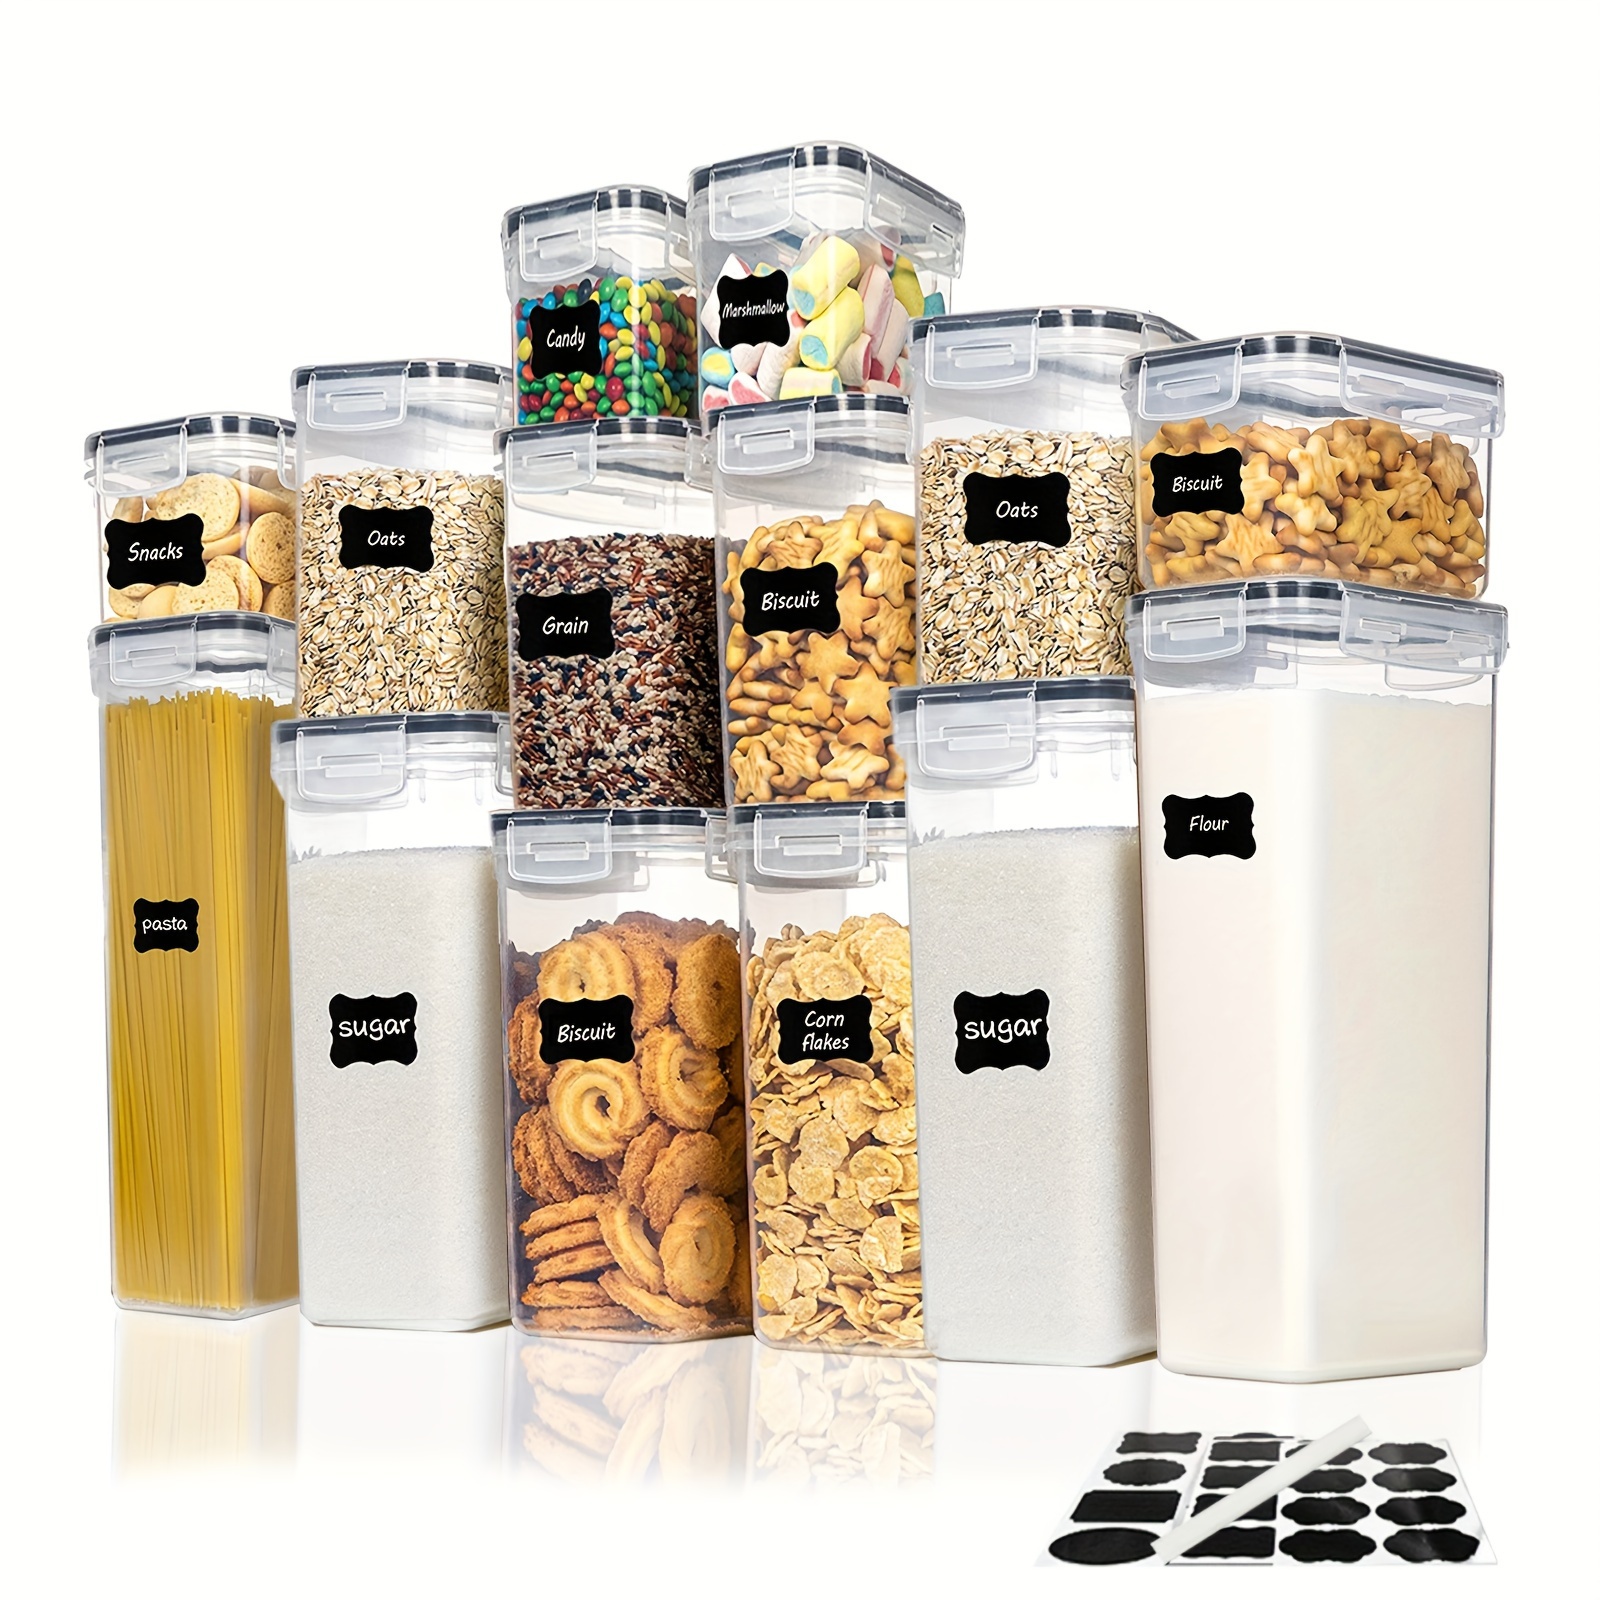 14 Pcs Airtight Food Storage Containers Storage for Sugar, Flour, Snack,  Baking